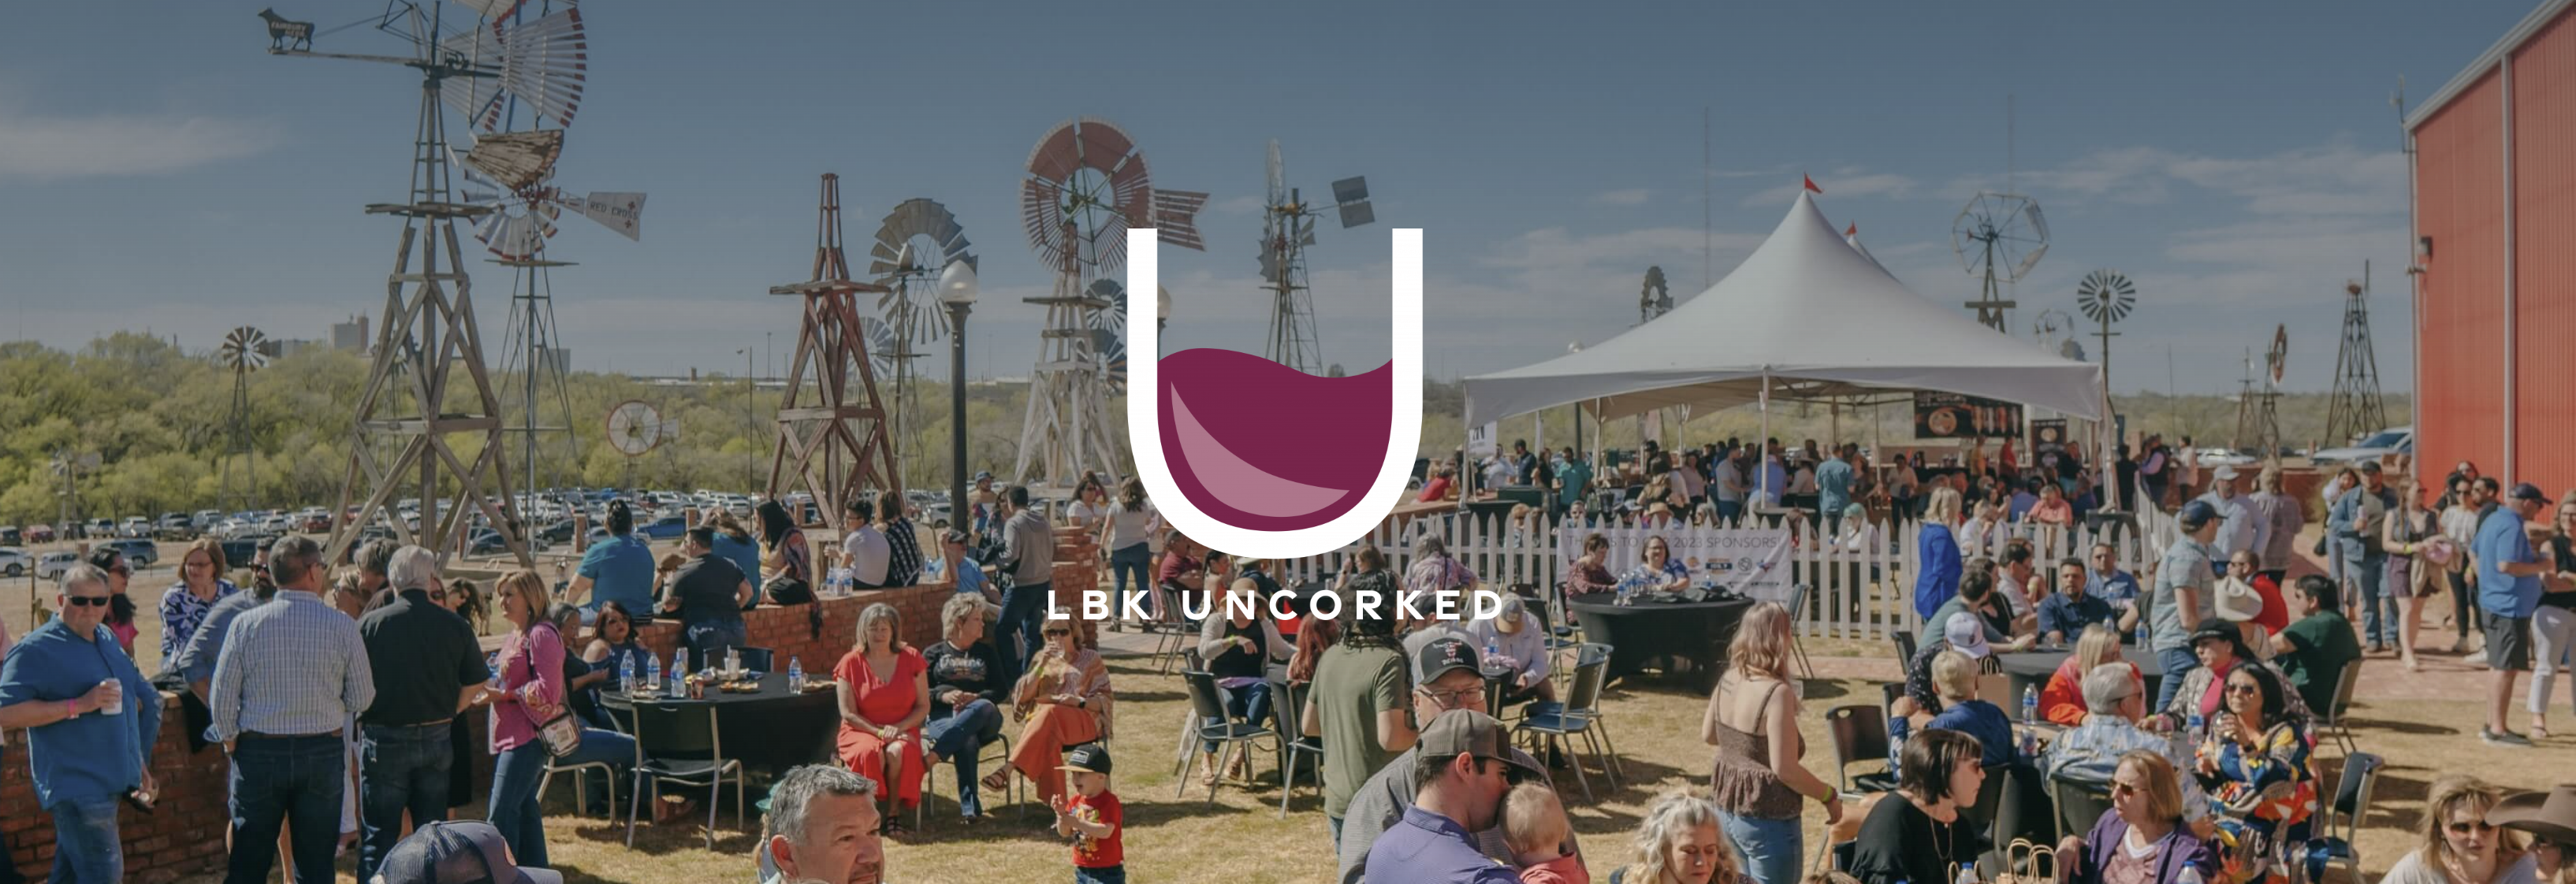 Lubbock Uncorked Logo over a photo of the past event